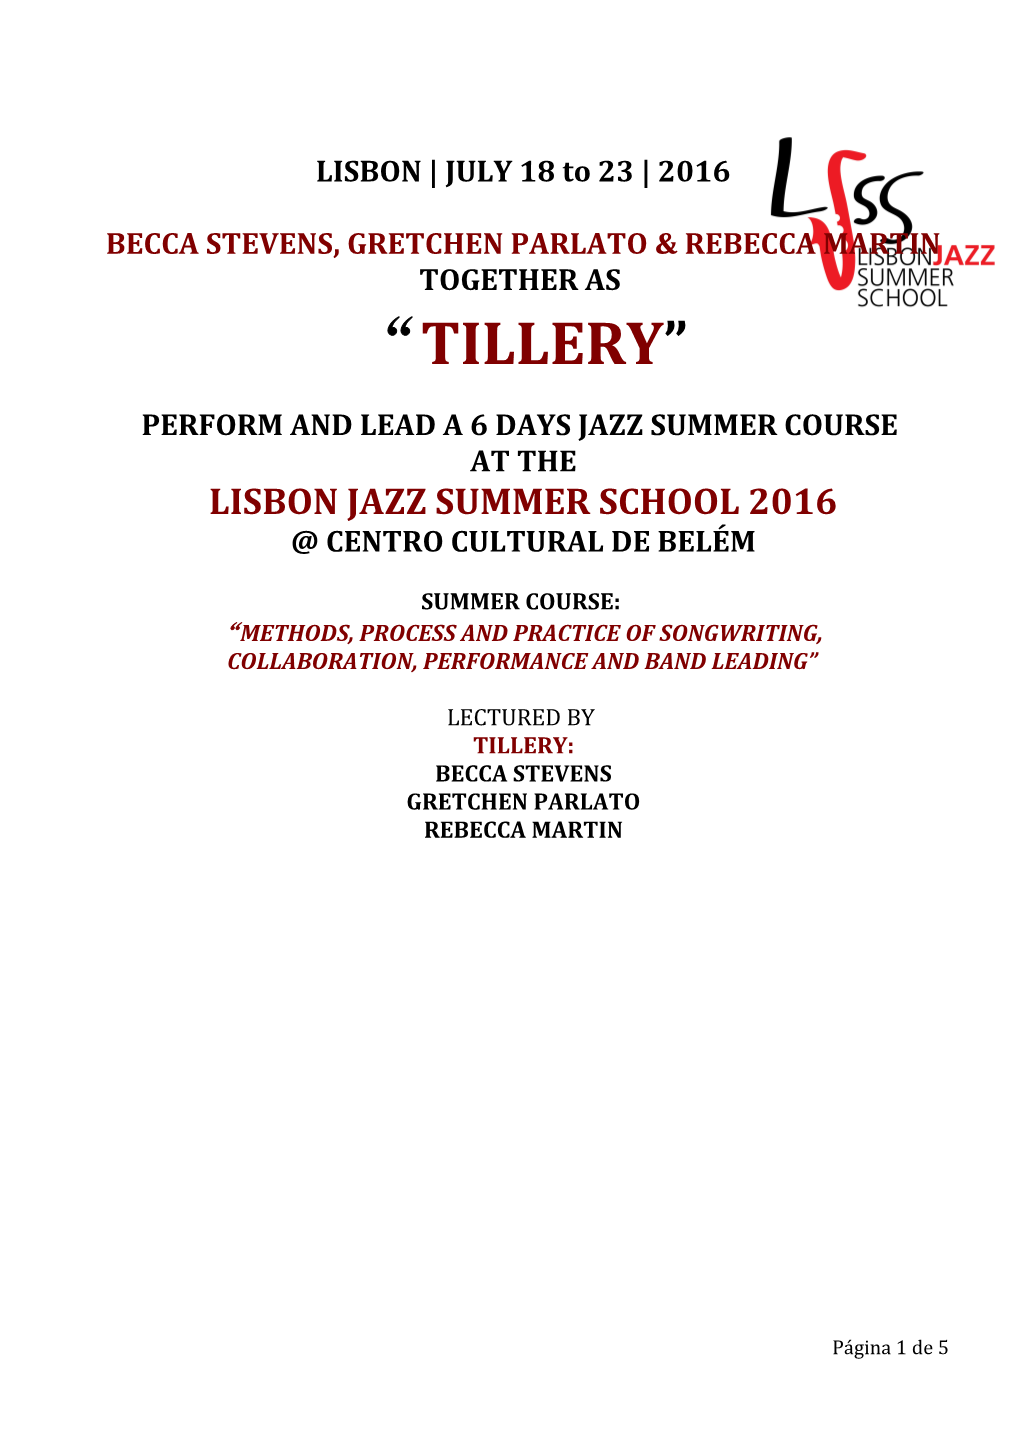 Perform and Lead a 6 Days Jazz Summer Course